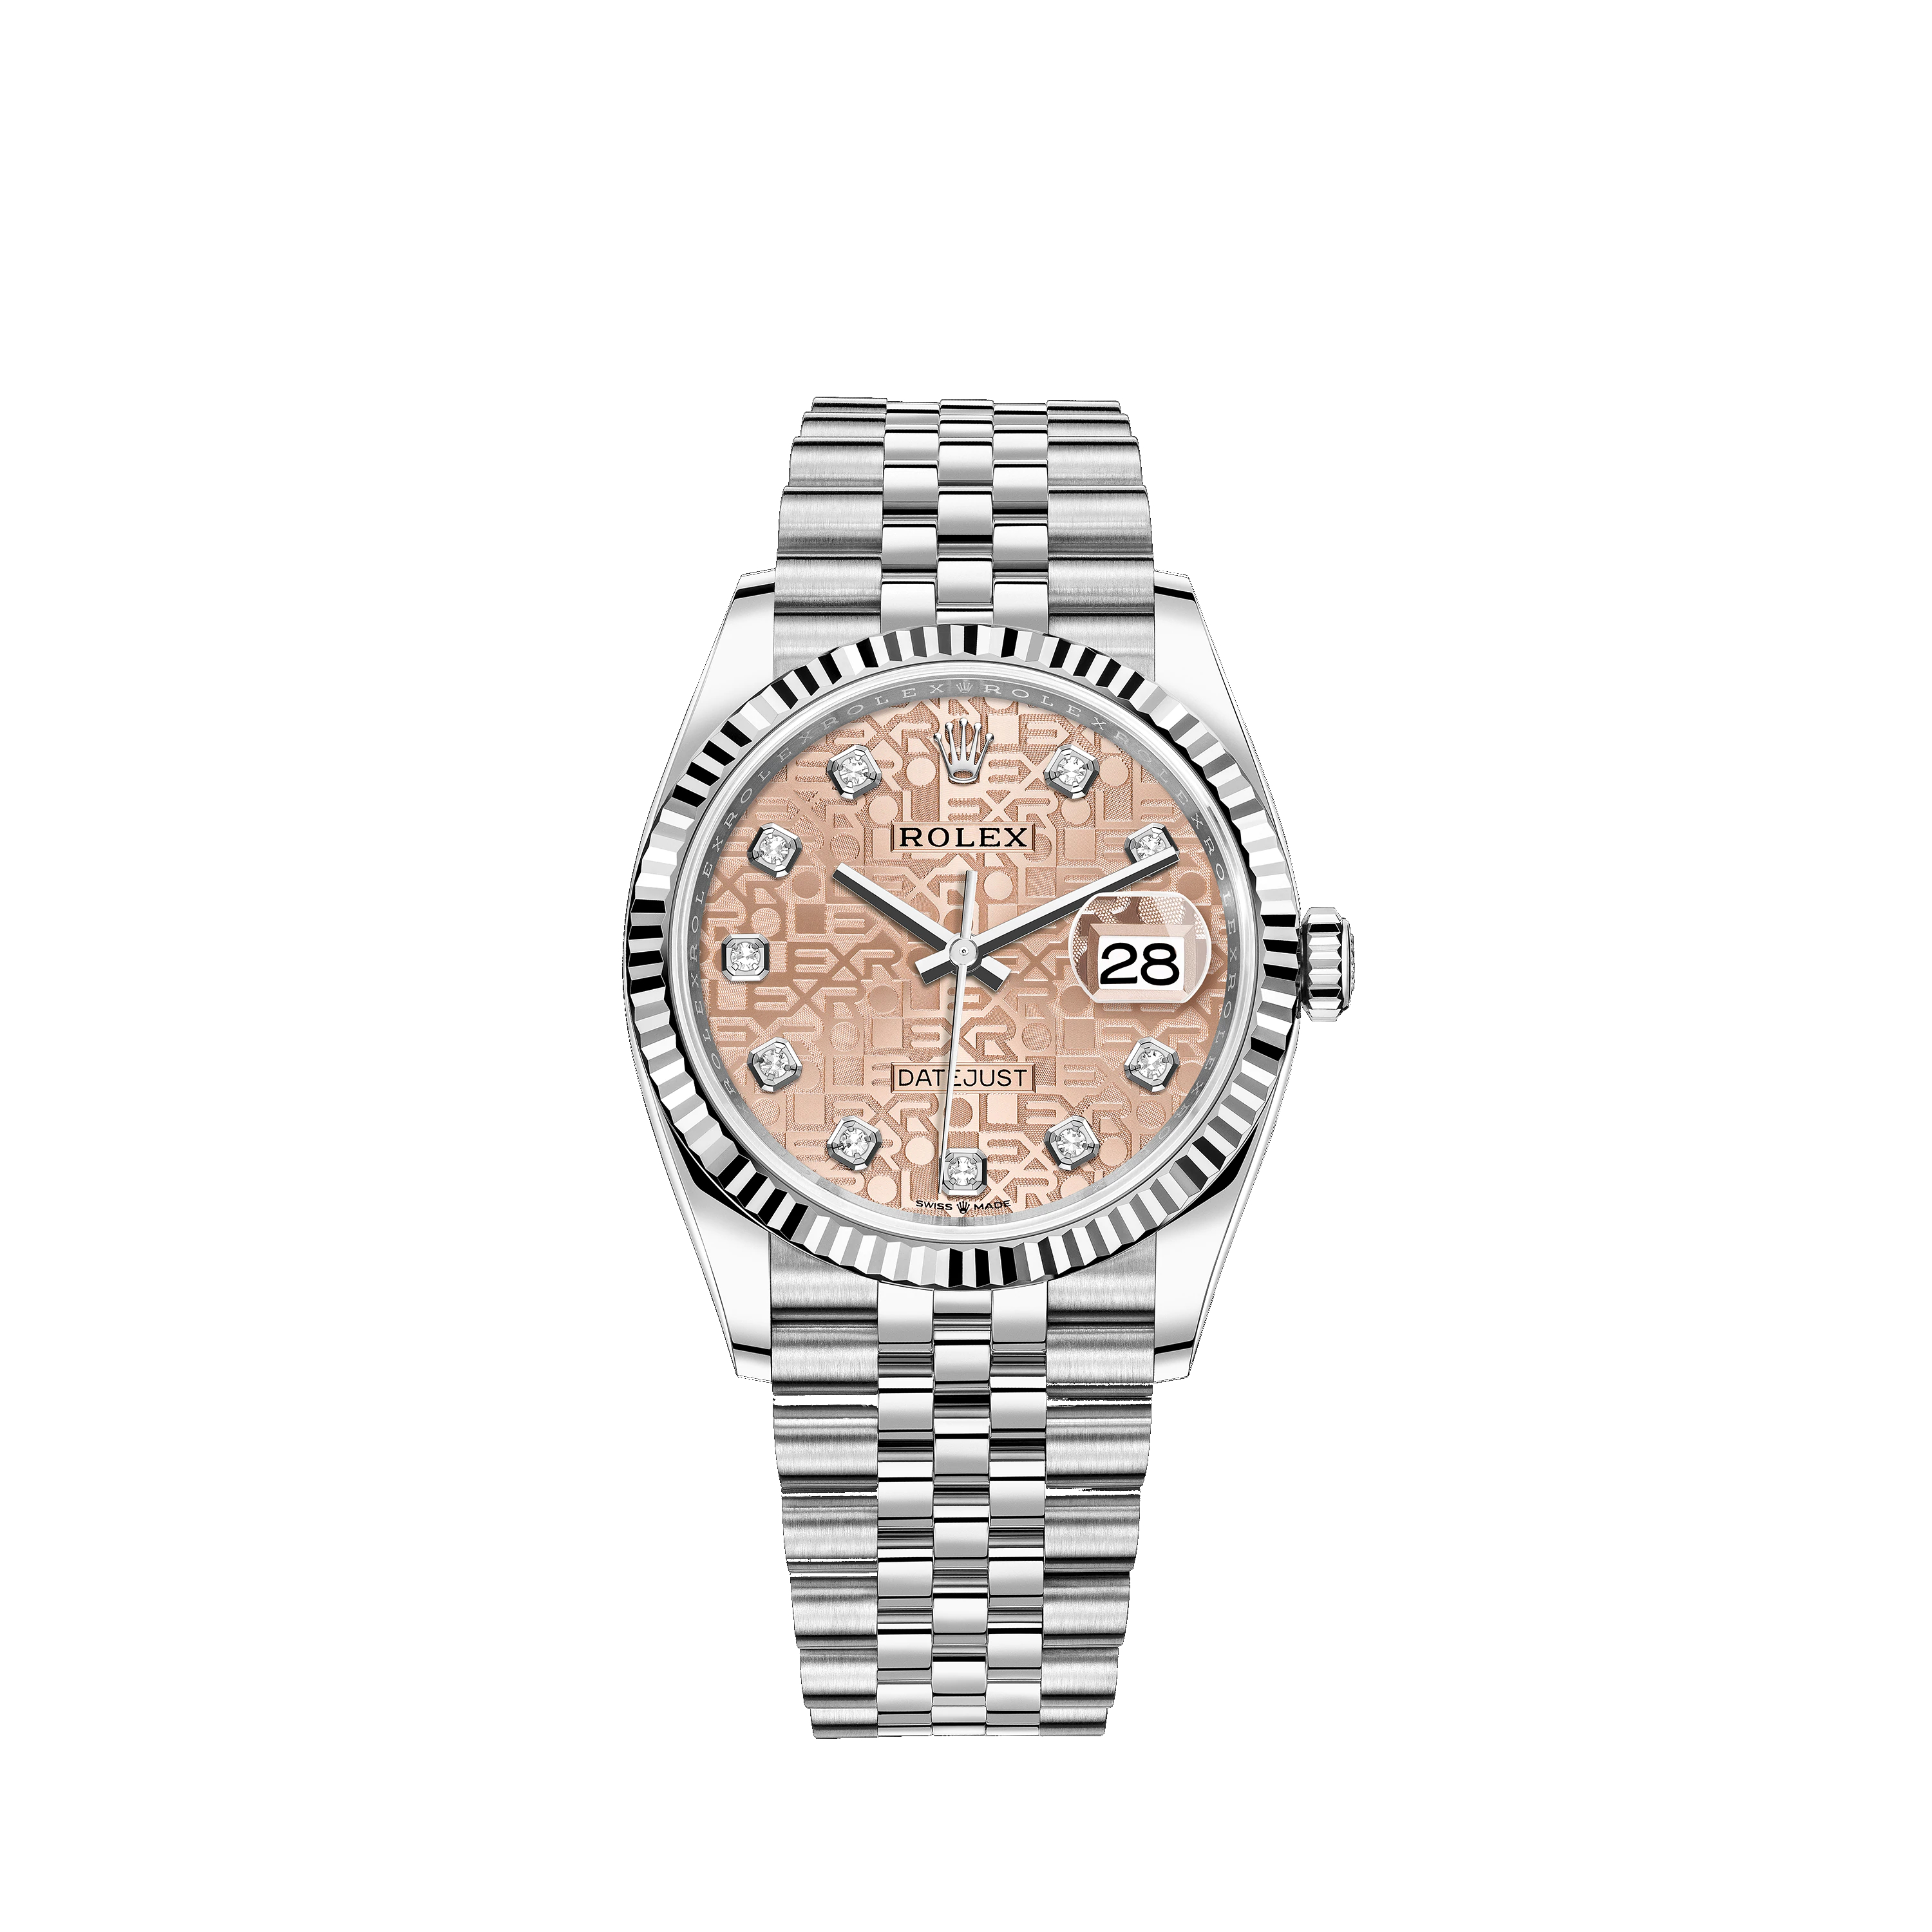 Datejust 36 126234 White Gold & Stainless Steel Watch (Pink Jubilee Design Set with Diamonds) - Click Image to Close